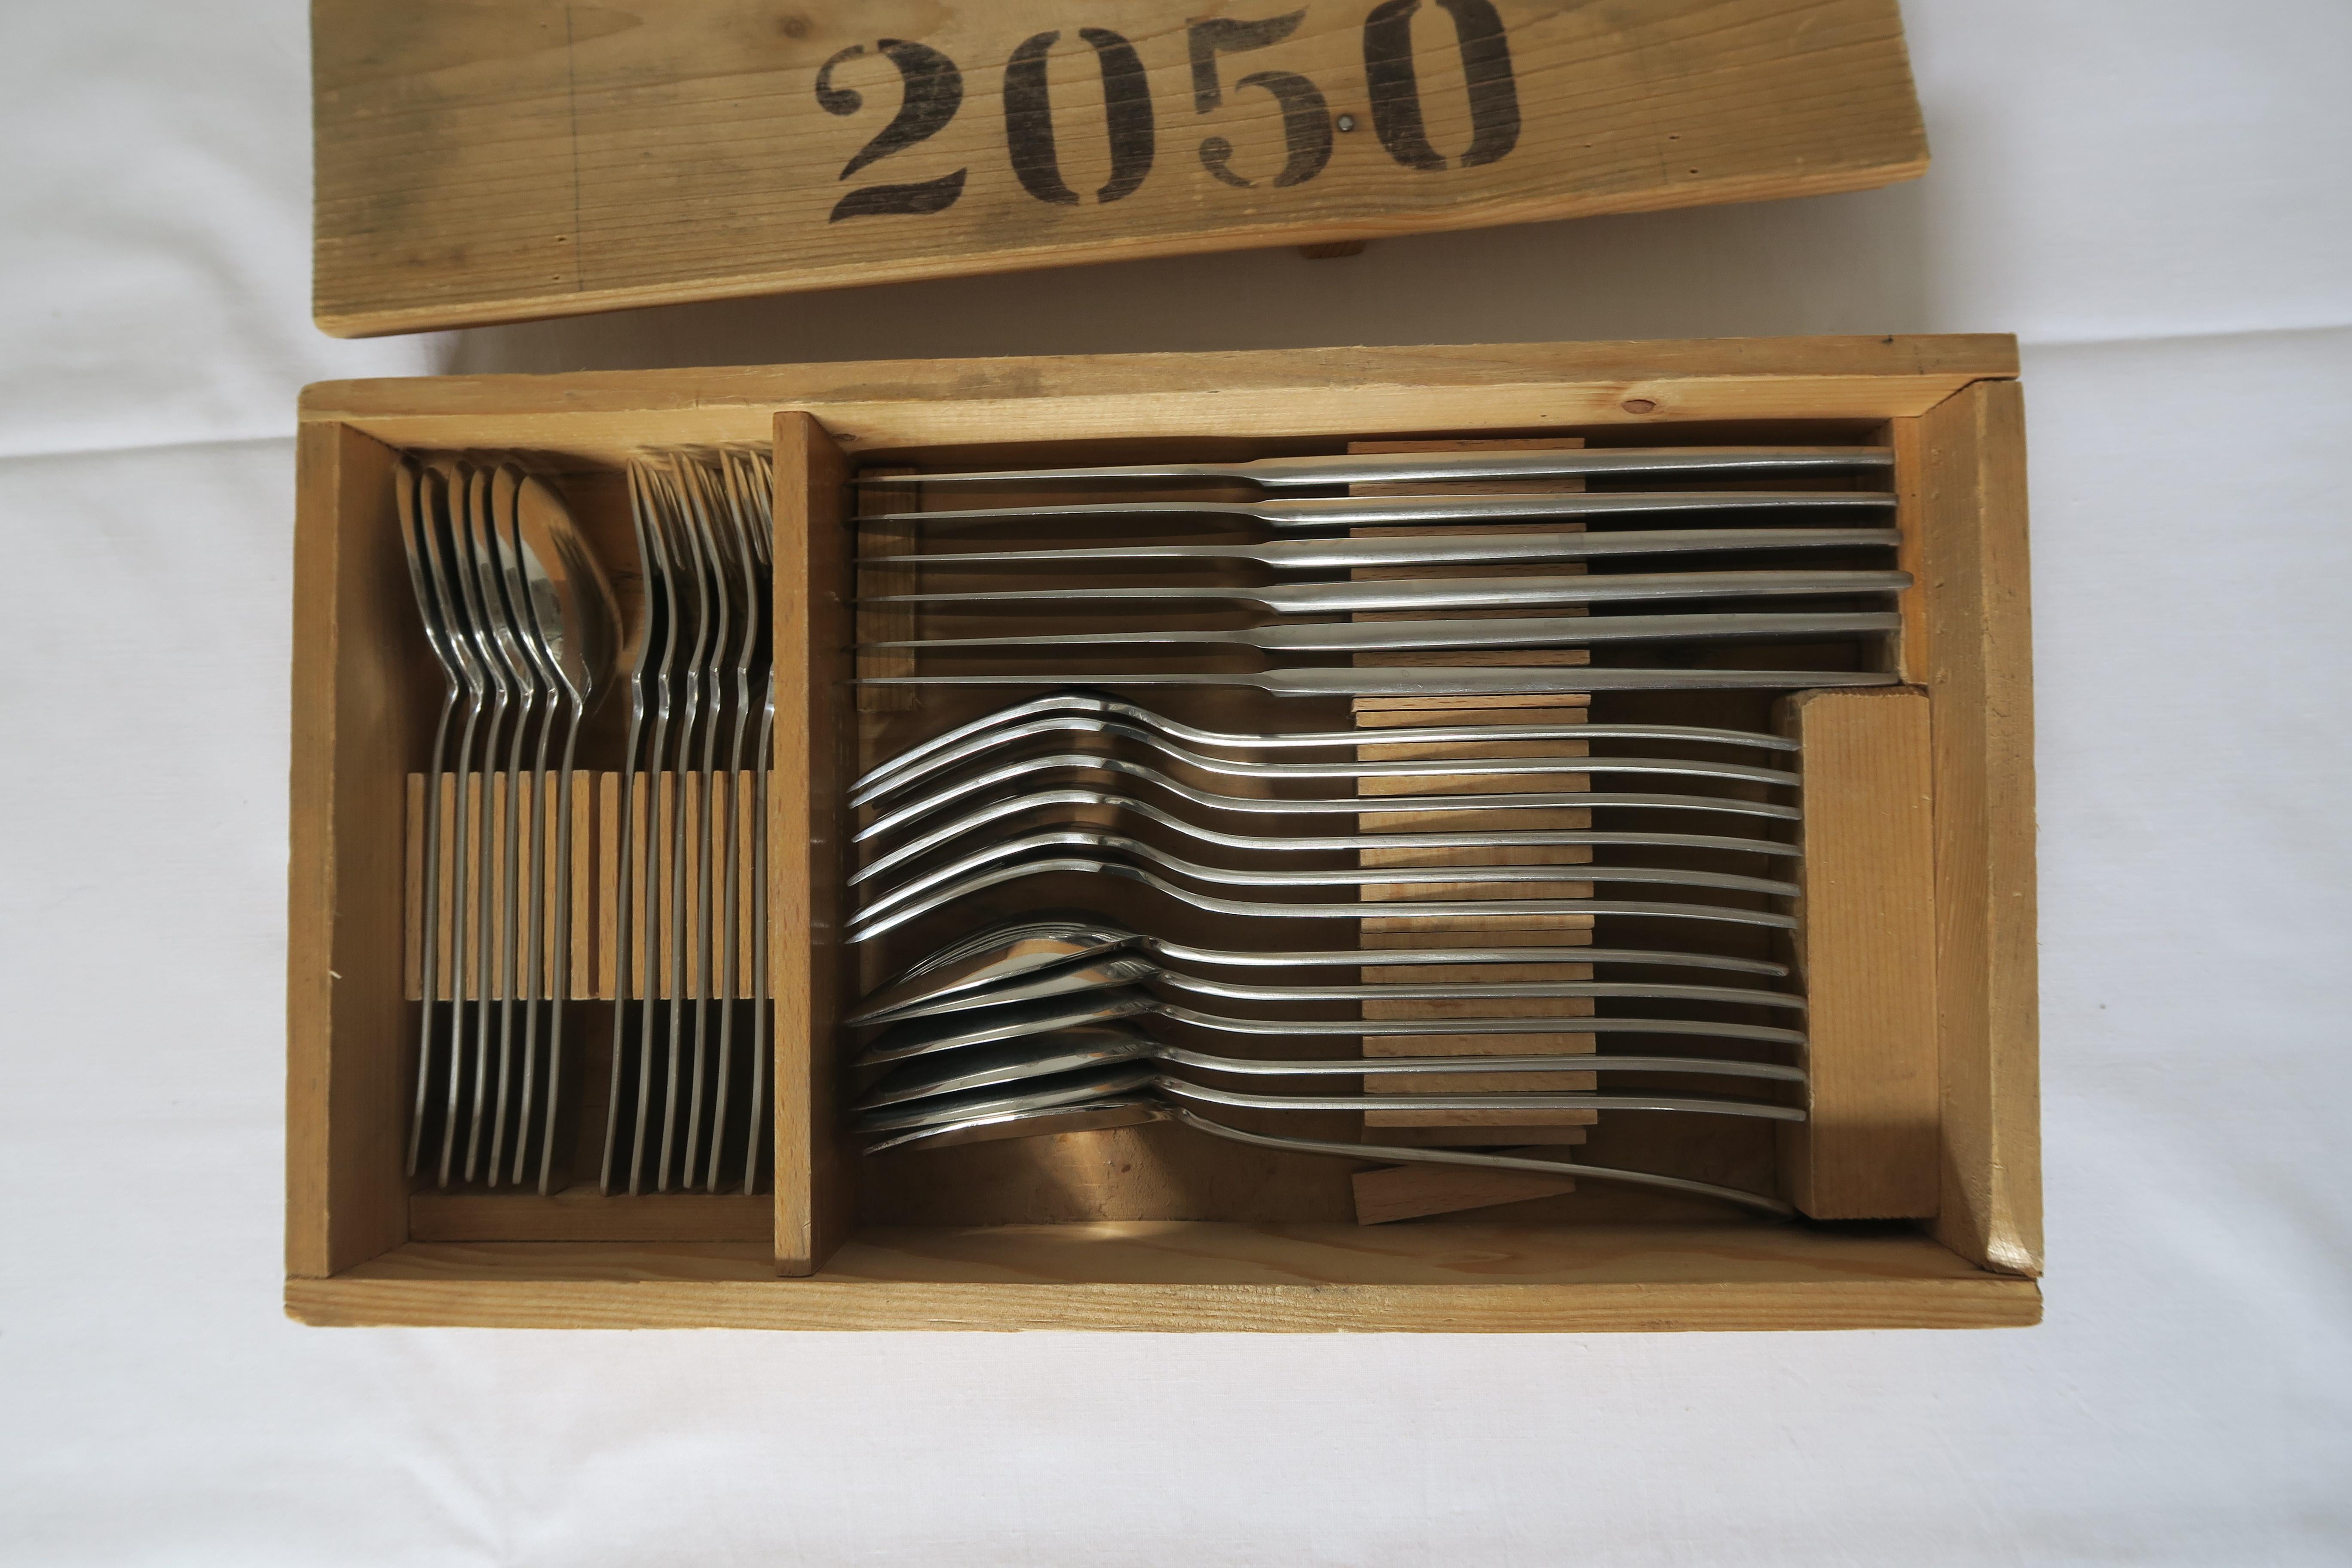 Original vintage tableware set consisting of 6 knives, 6 forks, 6 spoons, 6 dessert forks and 6 tea spoons. The set is complete and in great condition and arrives in the original vintage wooden box with the renowned Amboss Austria logo on the lid.